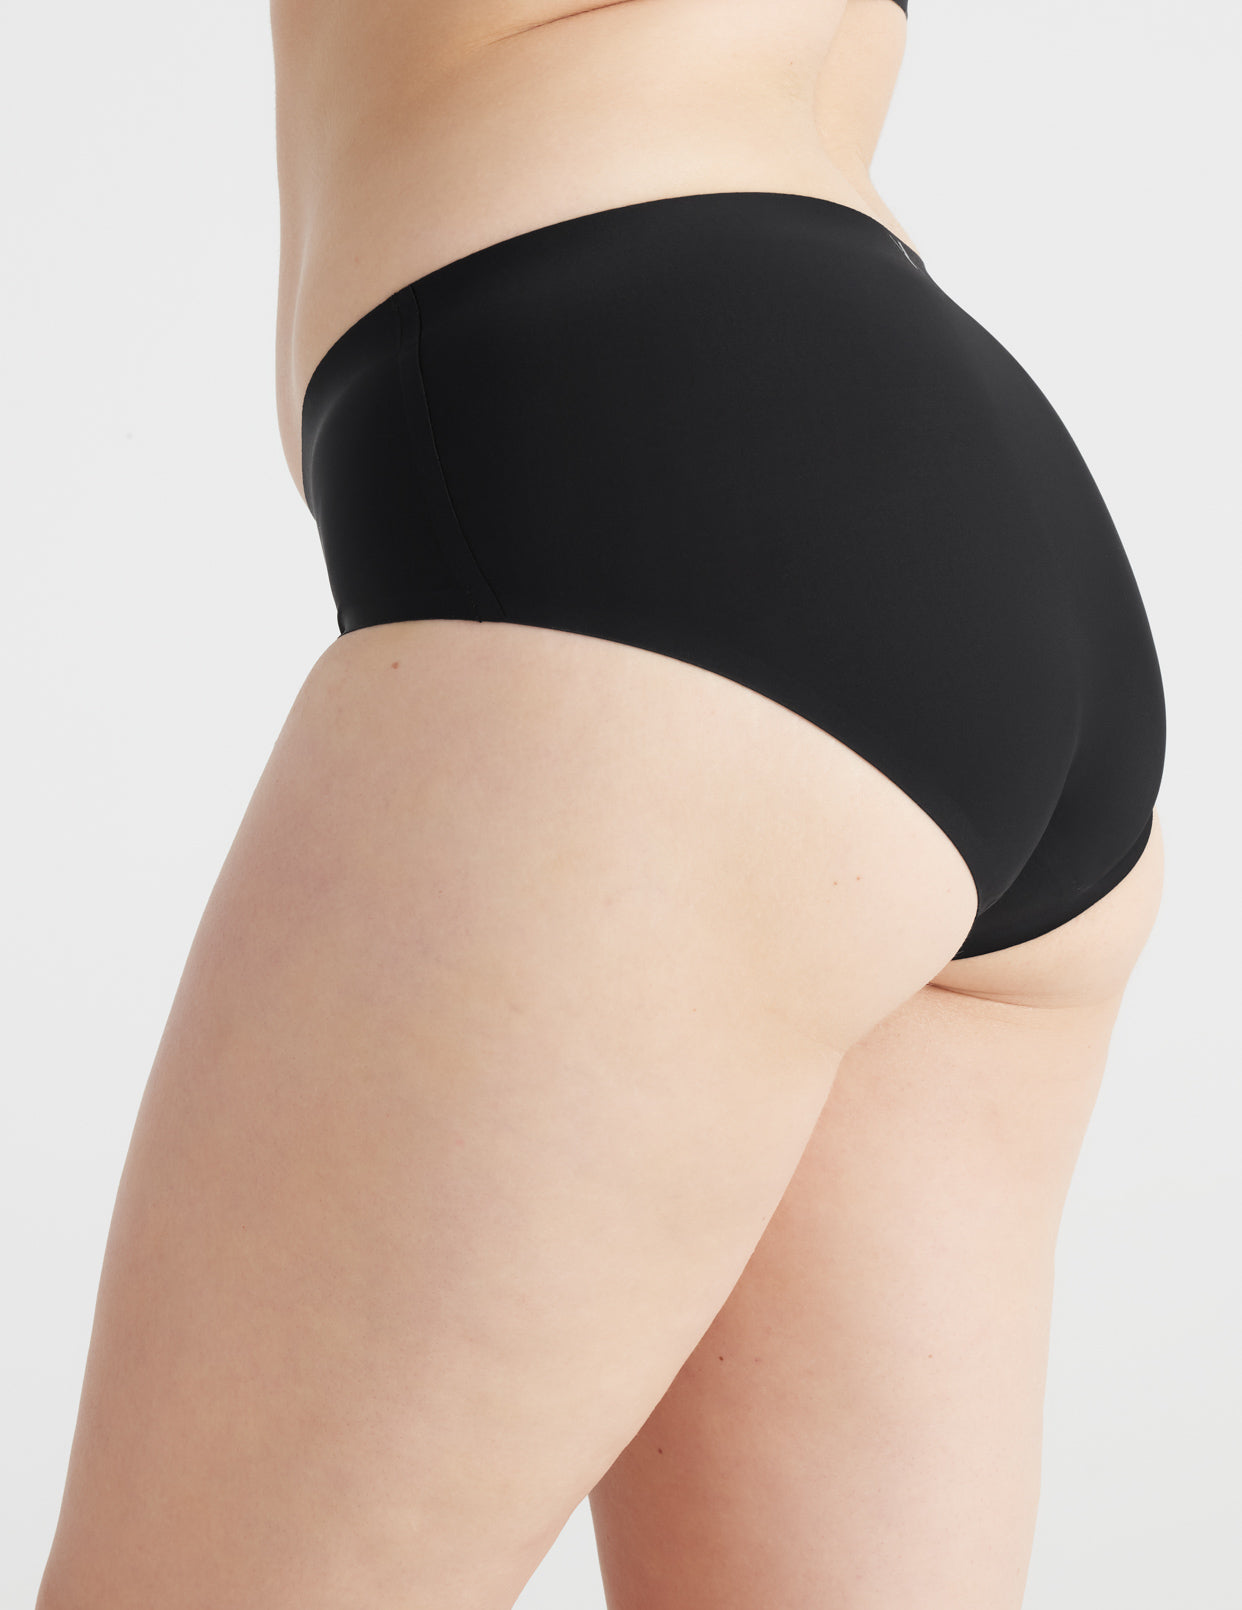 KNIX Super Leakproof Boyshort - Period Underwear for Women - Black, X-Small  (1 Pack) at  Women's Clothing store